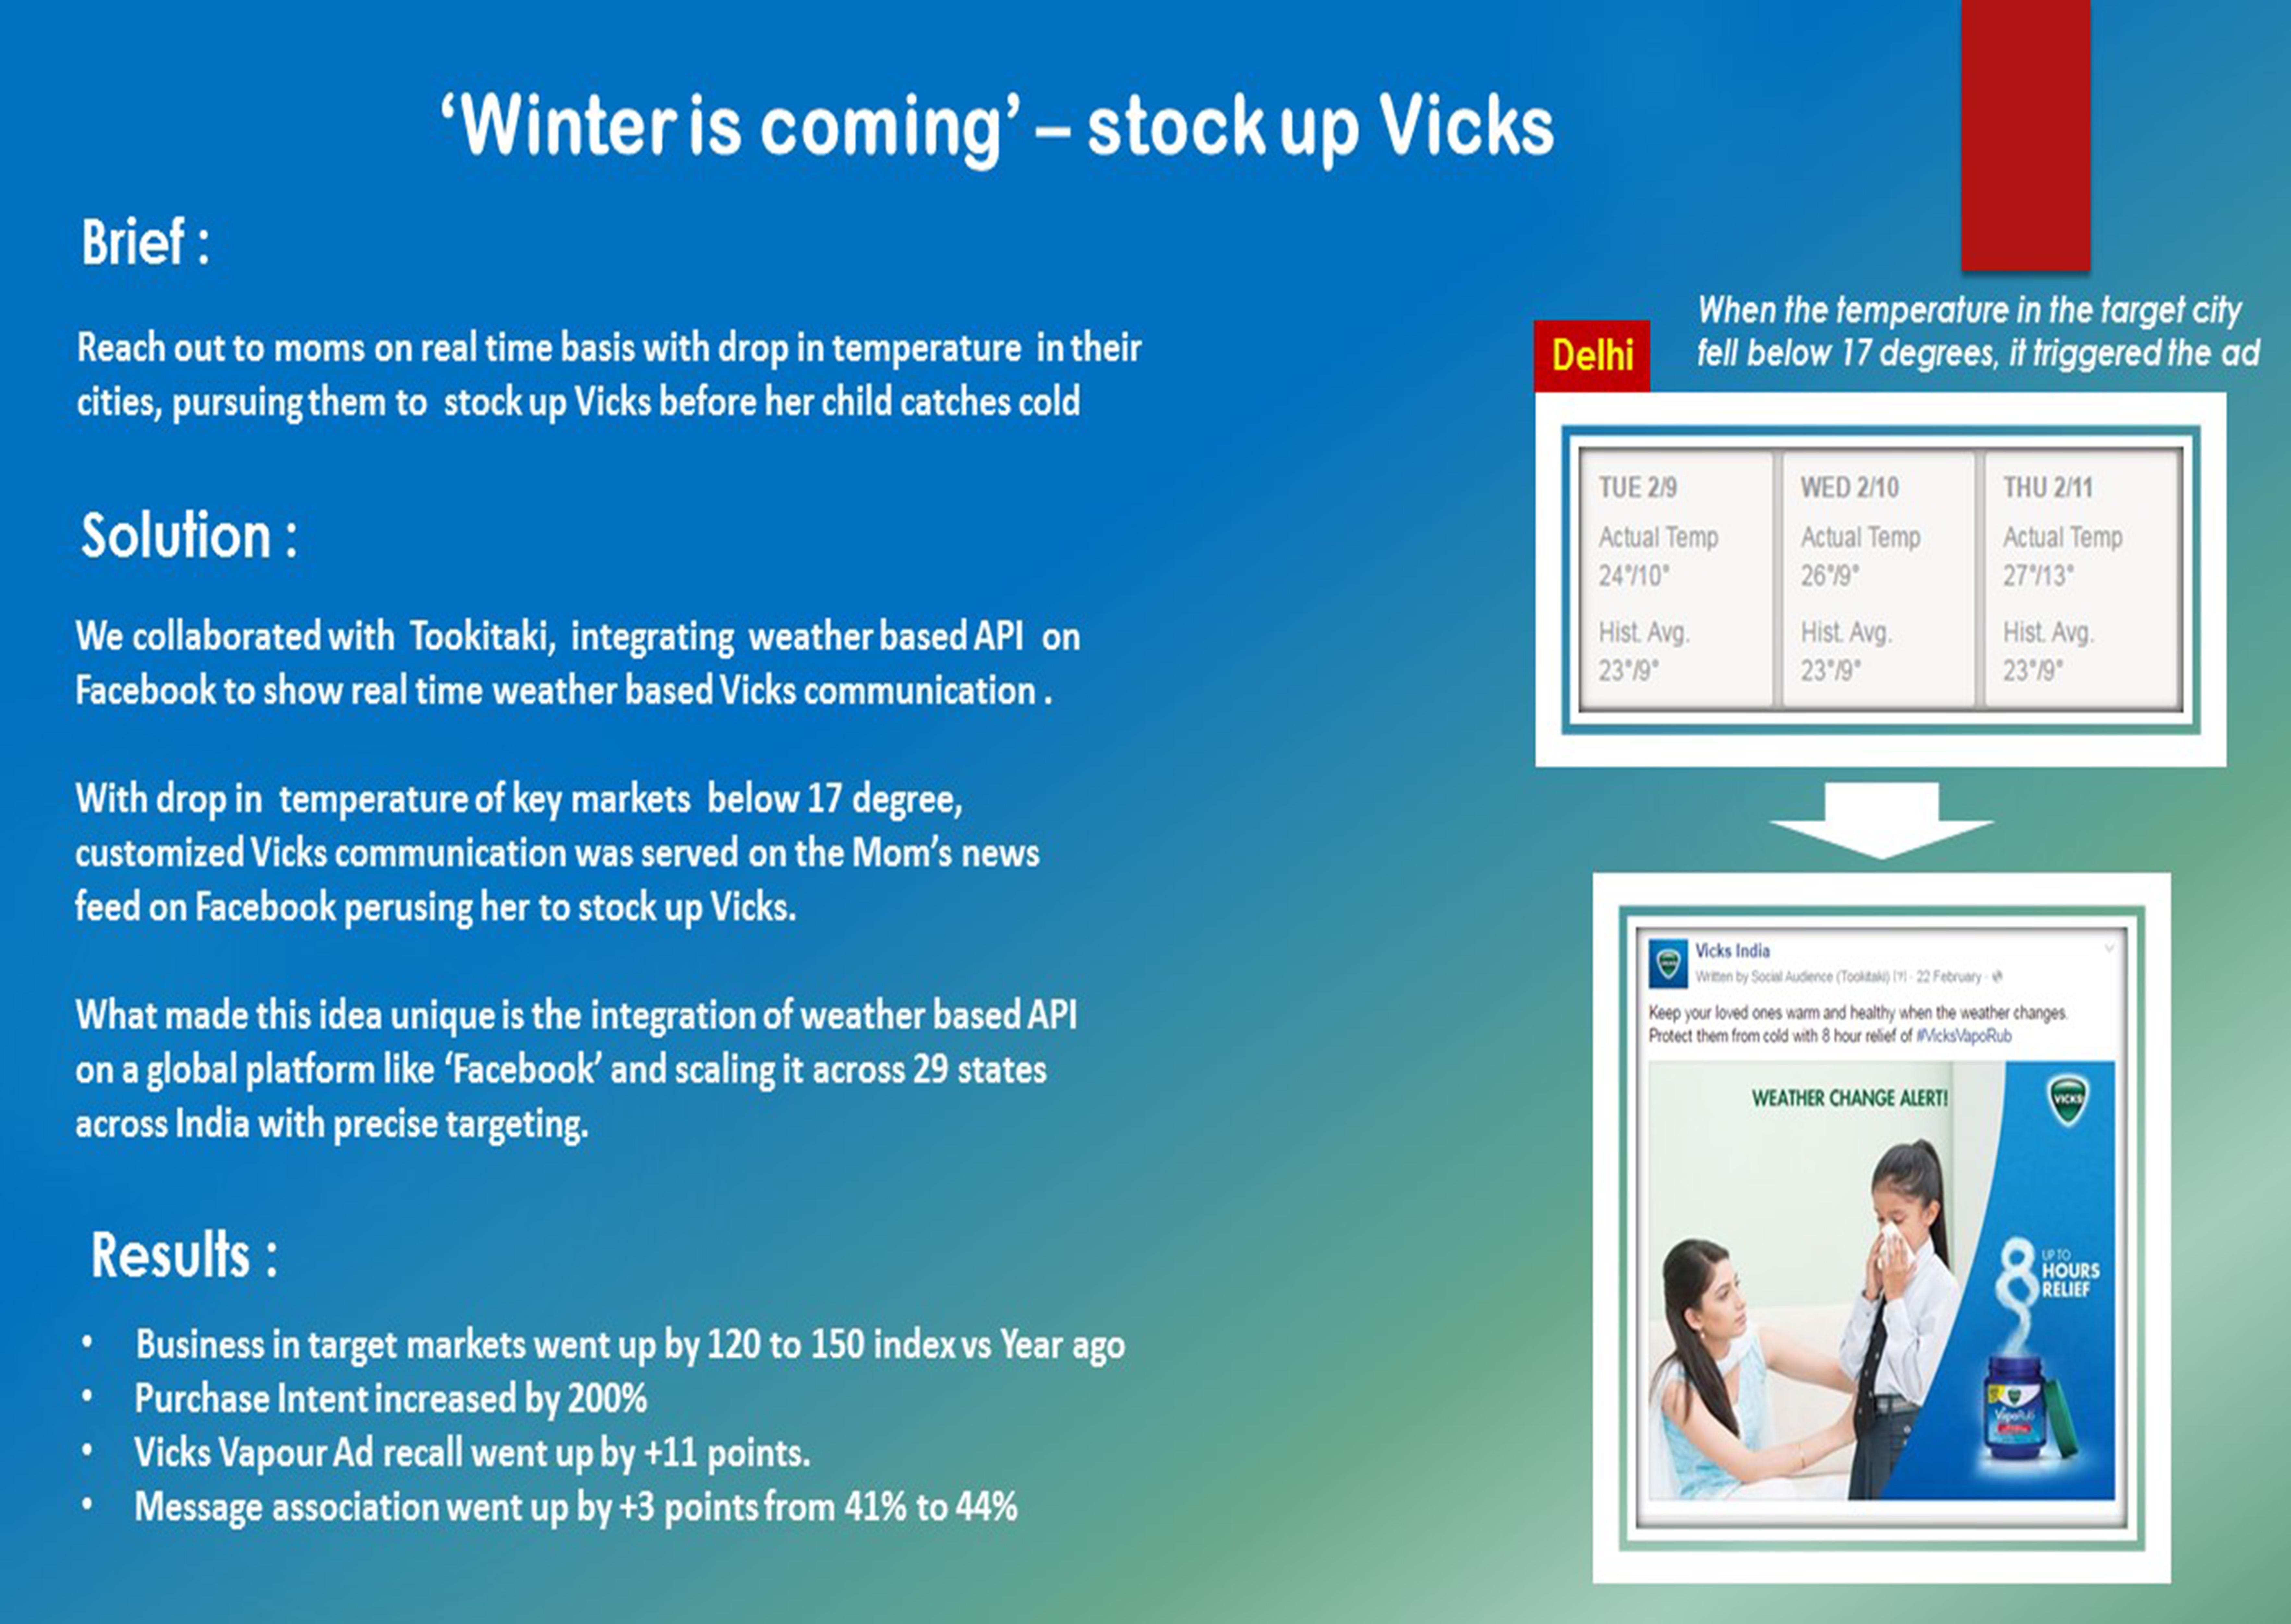 Winter Is Coming - "Stock Up Vicks"